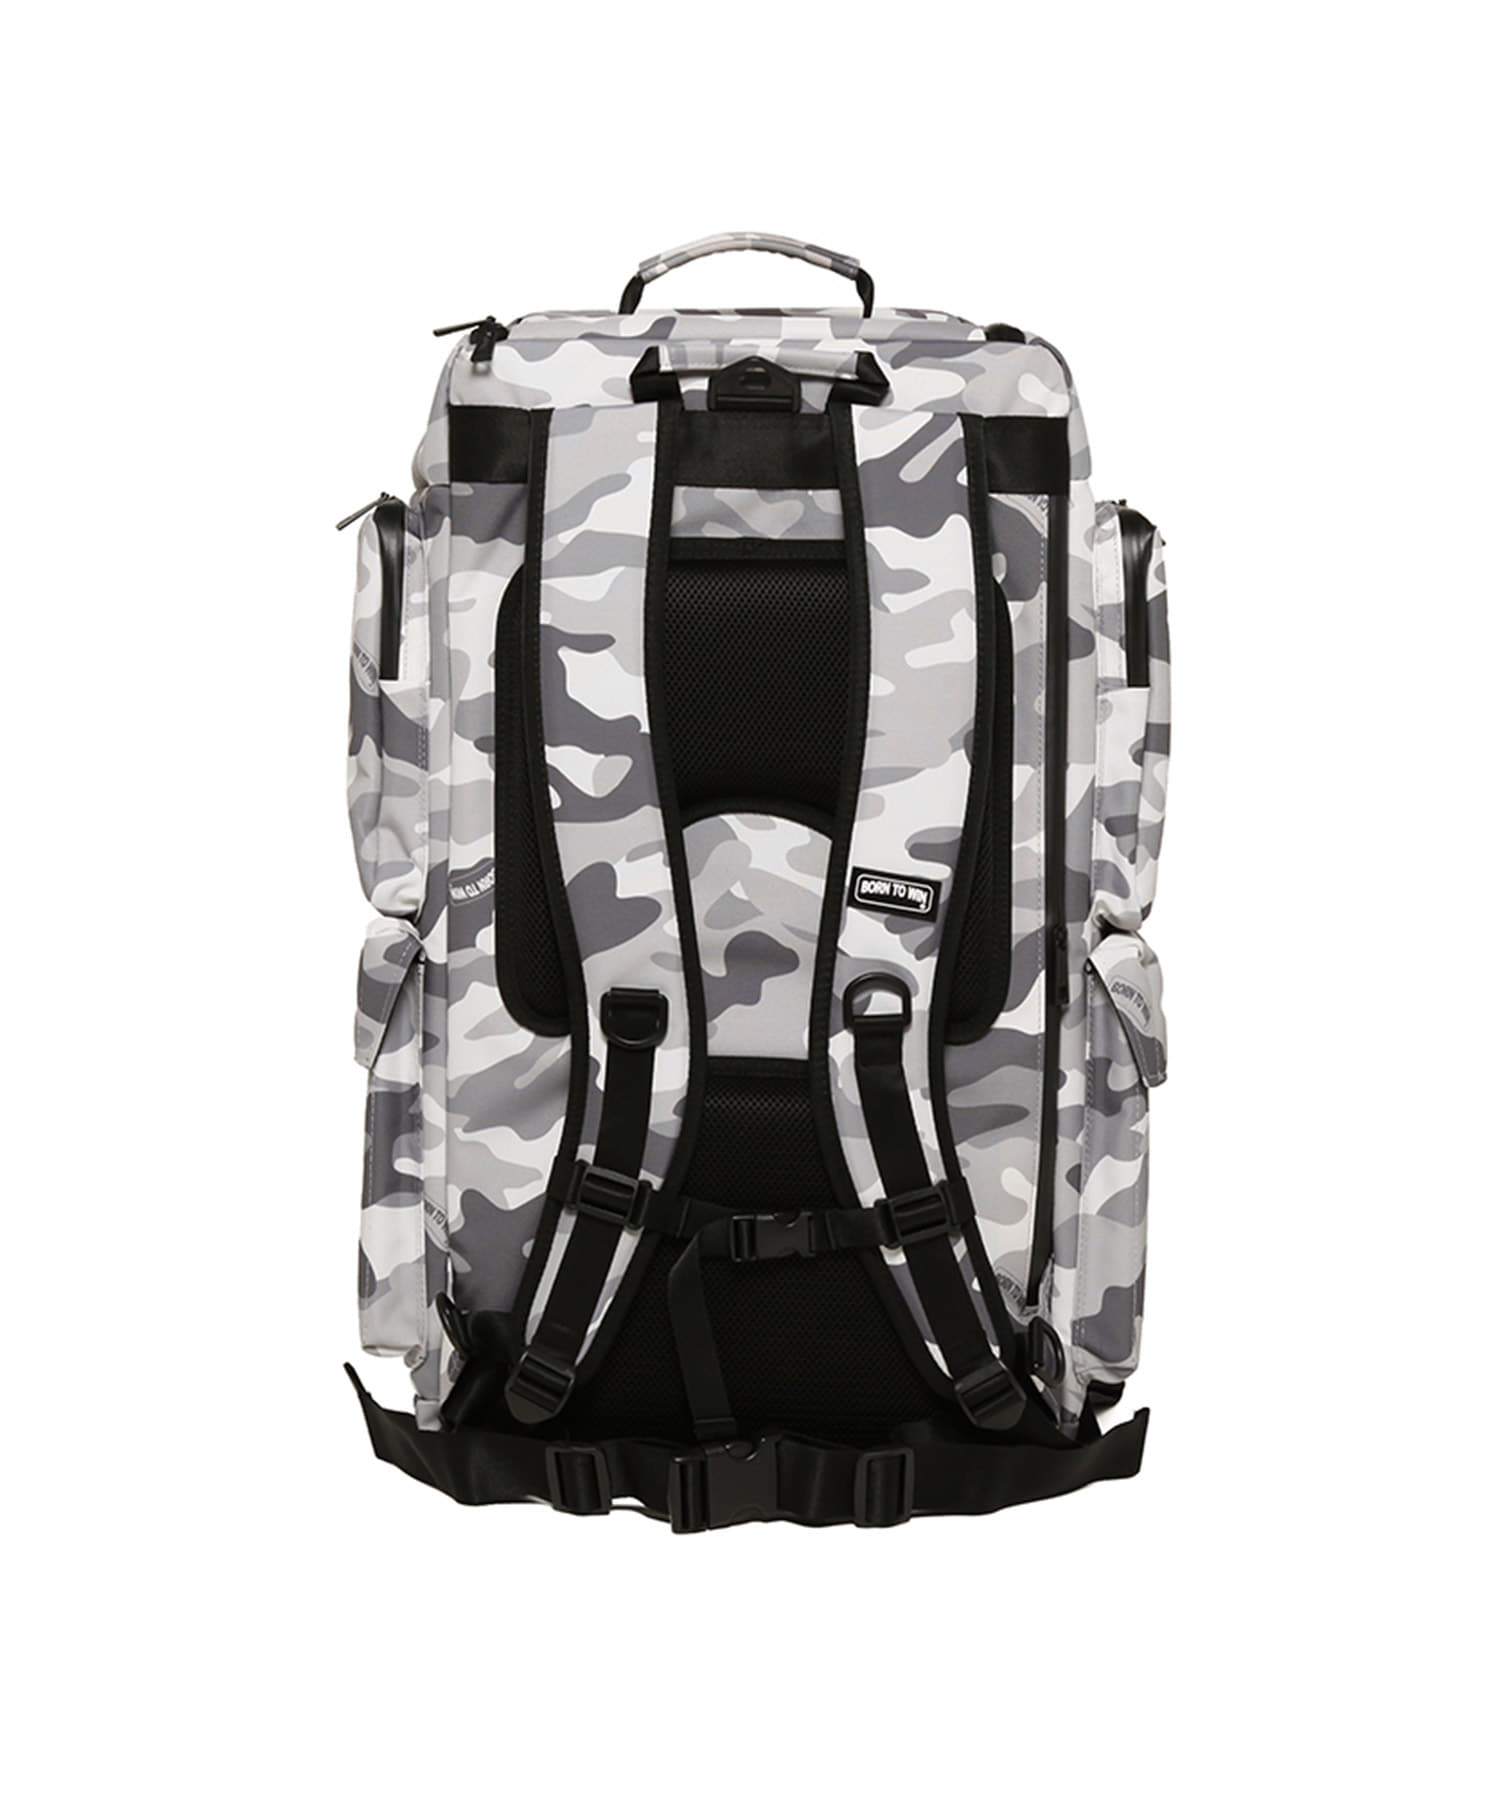 B1 BACKPACK NO PATCH VER [GREY CAMO]